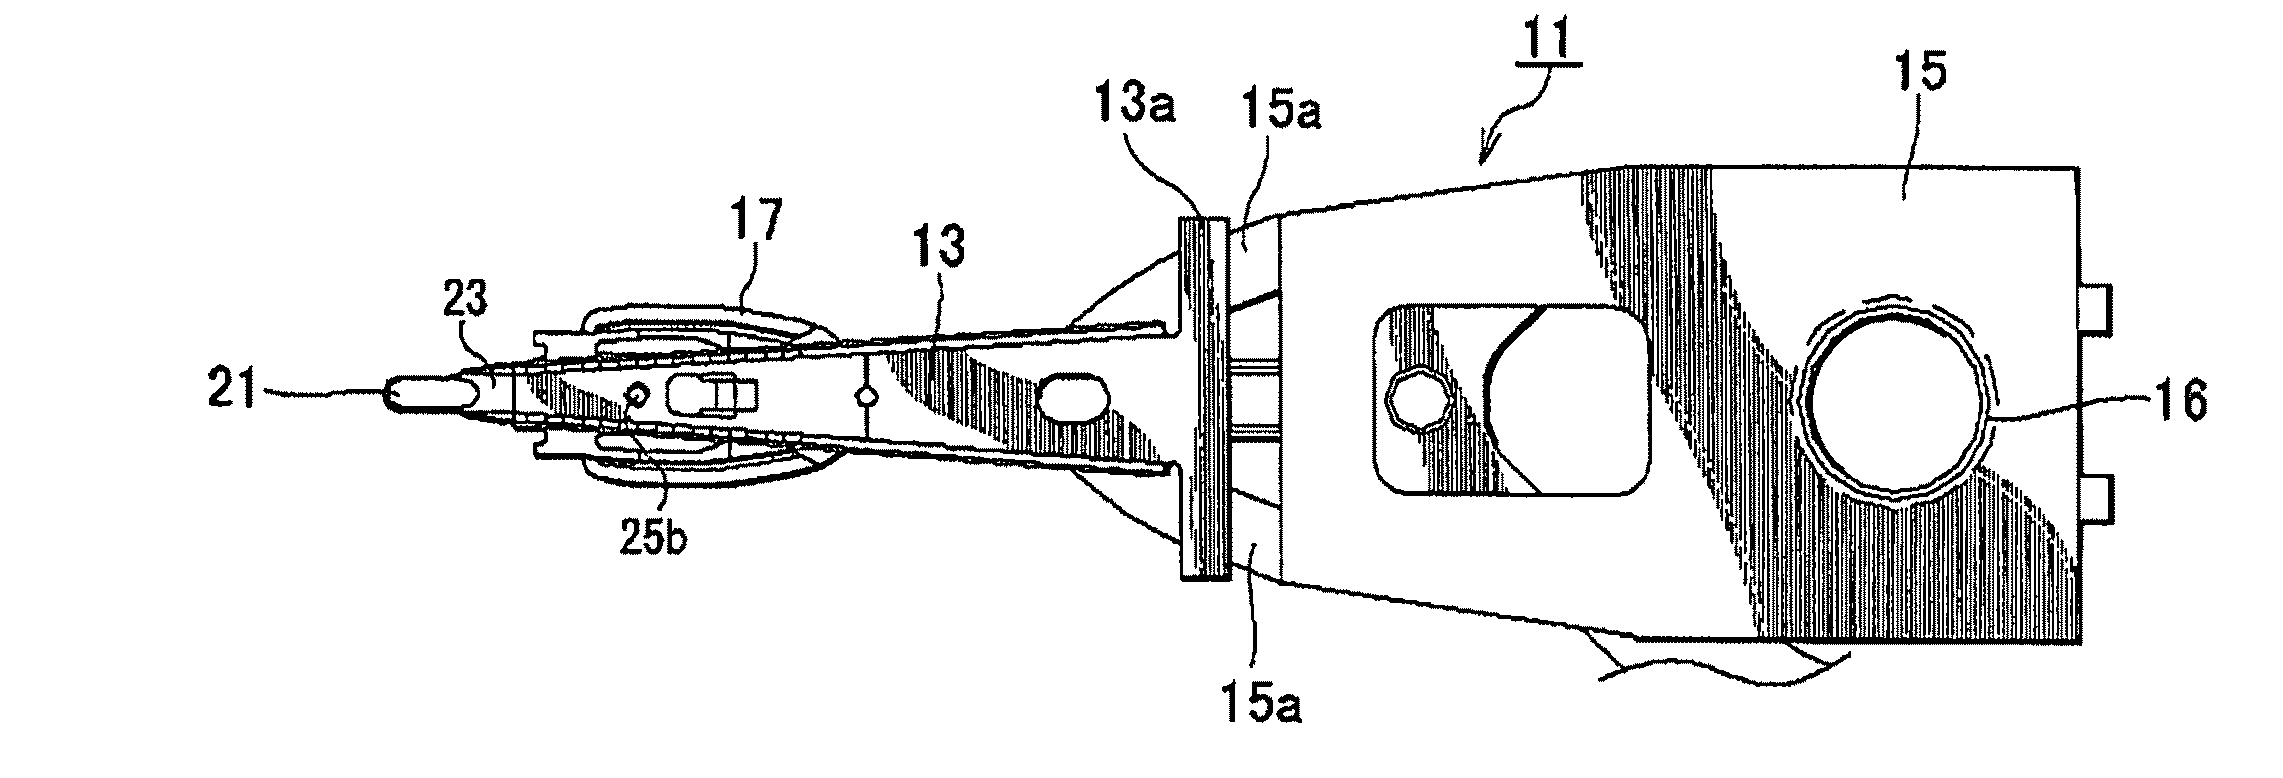 Head suspension, load beam, and method of manufacturing load beam